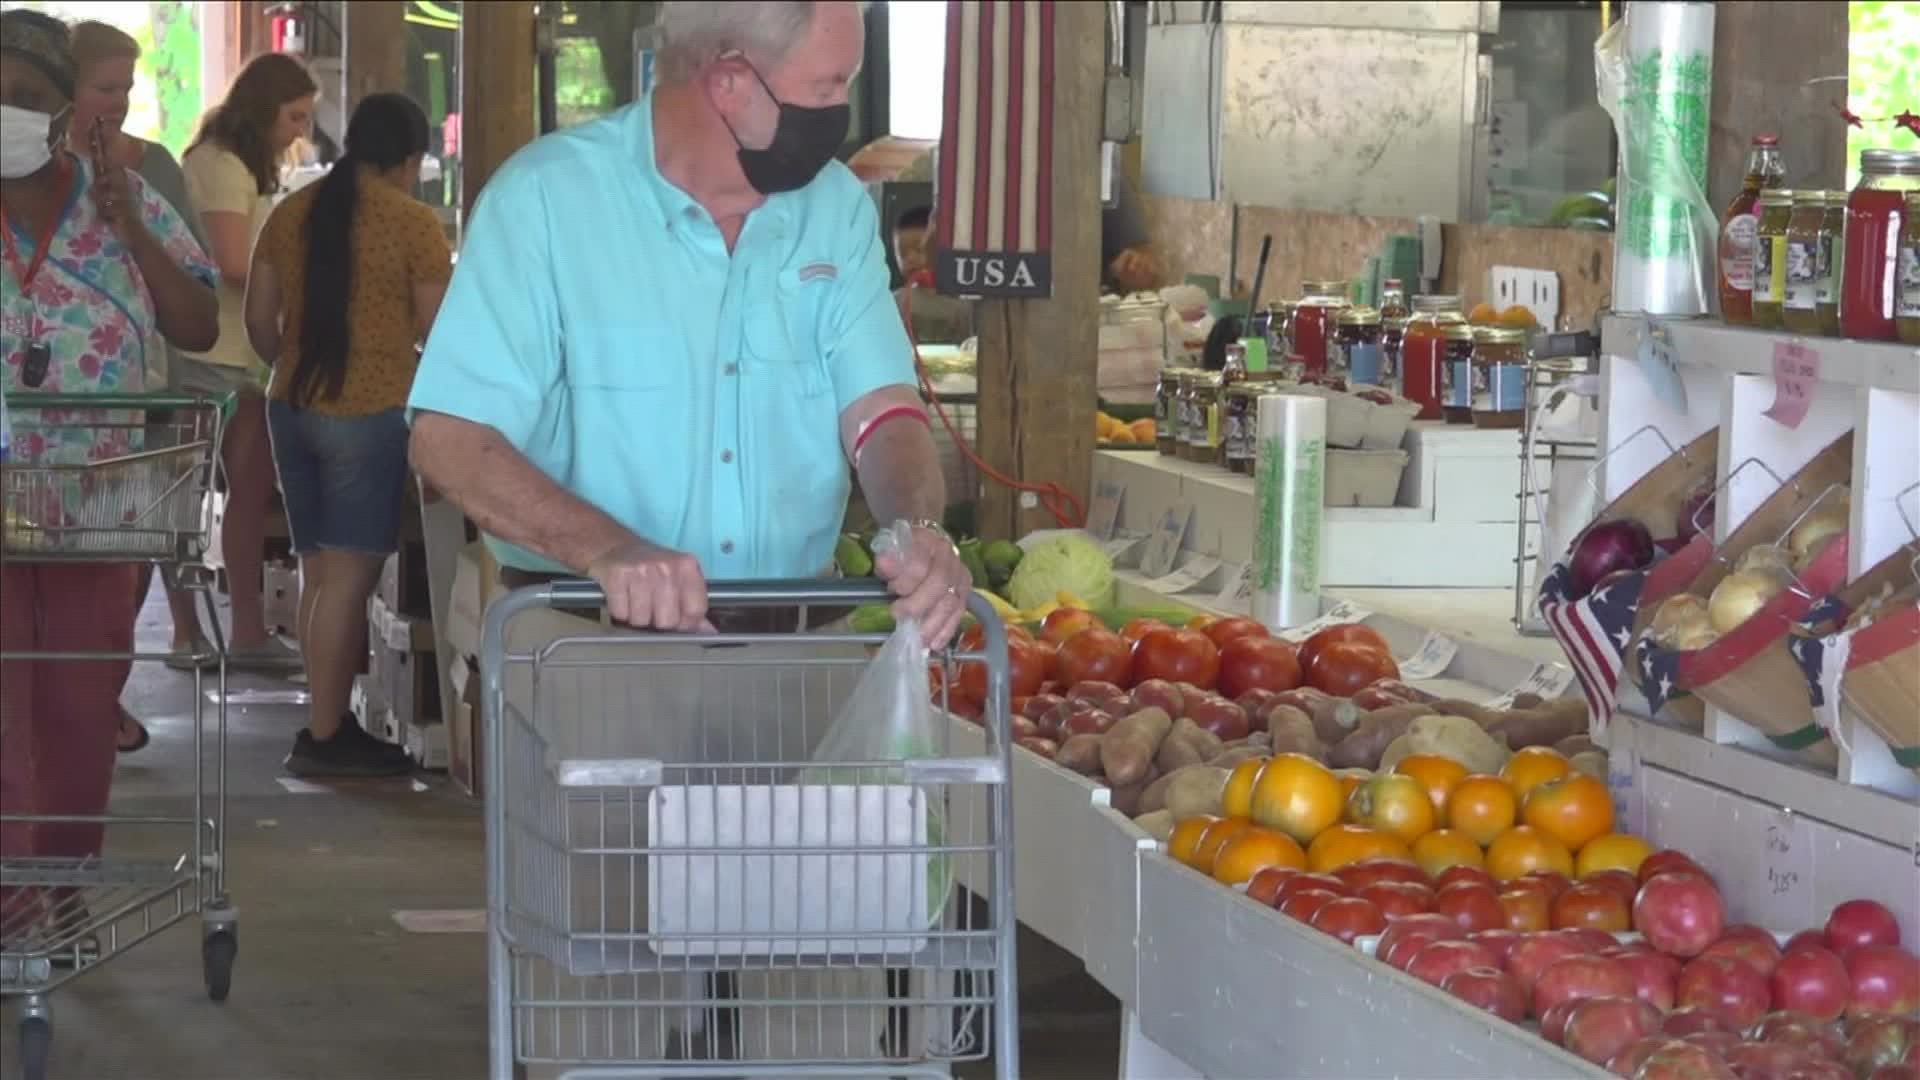 Sandy Lee, owner of Sandy's Farm, said it's a "privilege" to be able to help the community by working with the farmer's market at The Agricenter.